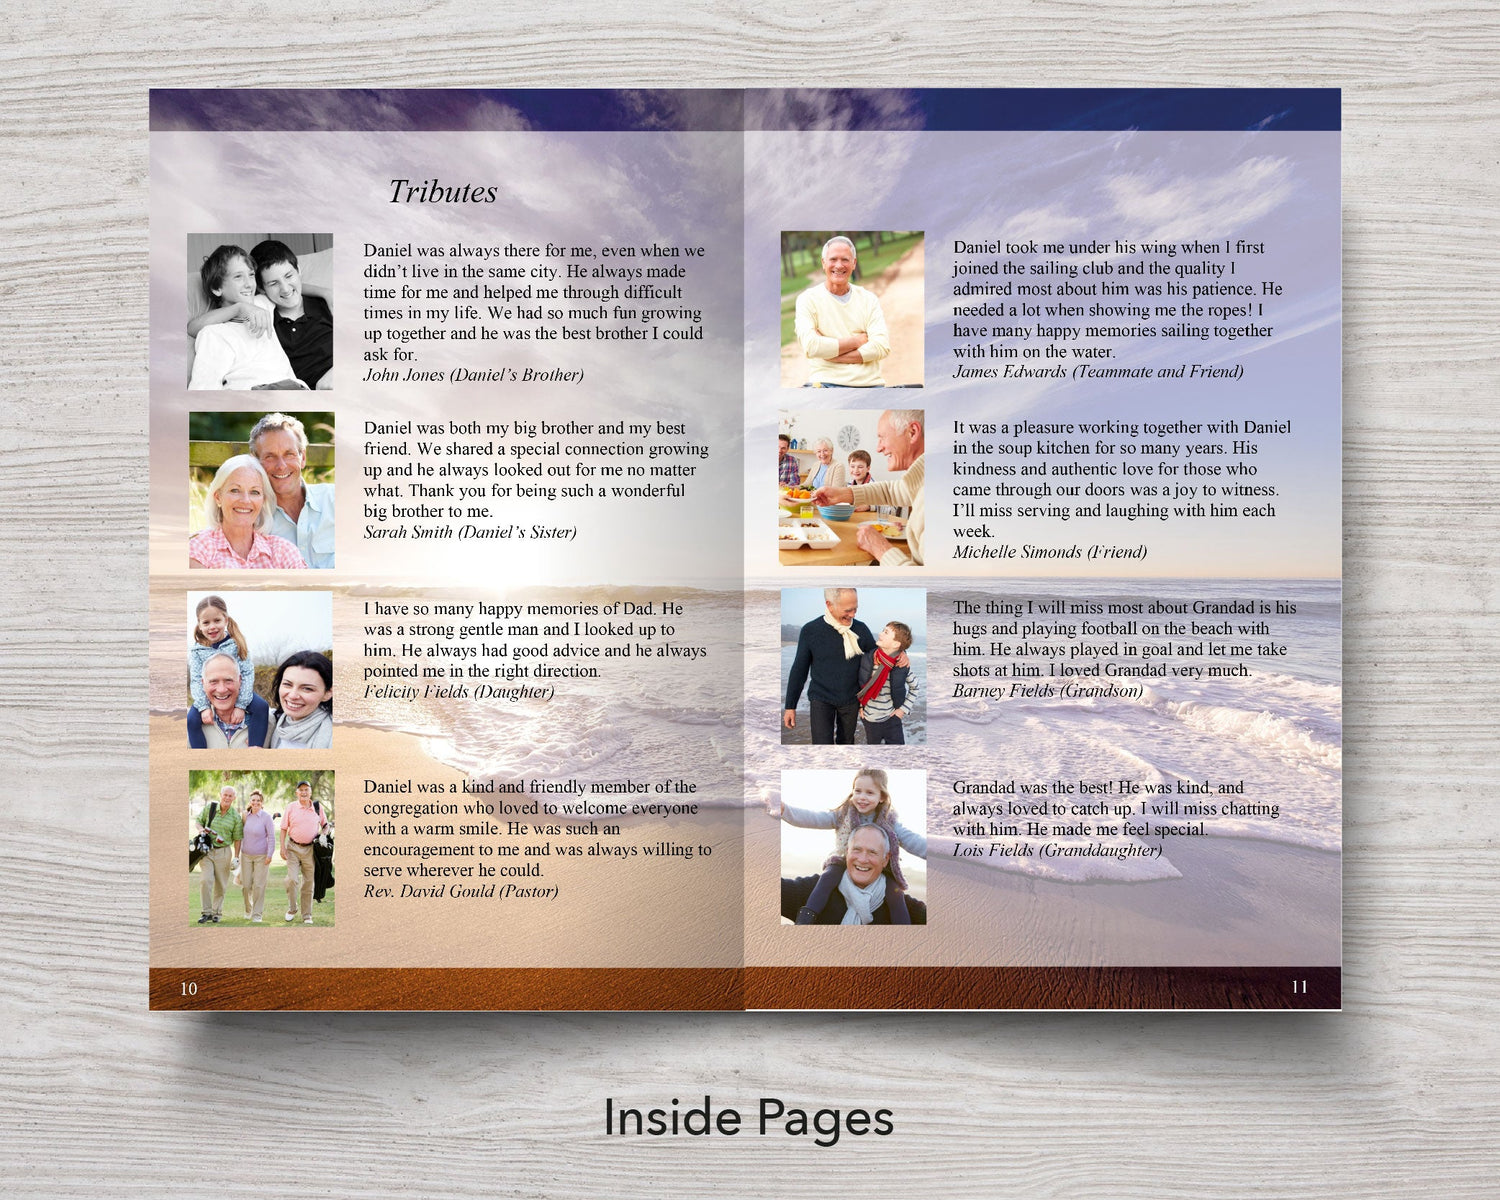 12 Page Waves Funeral Program Template